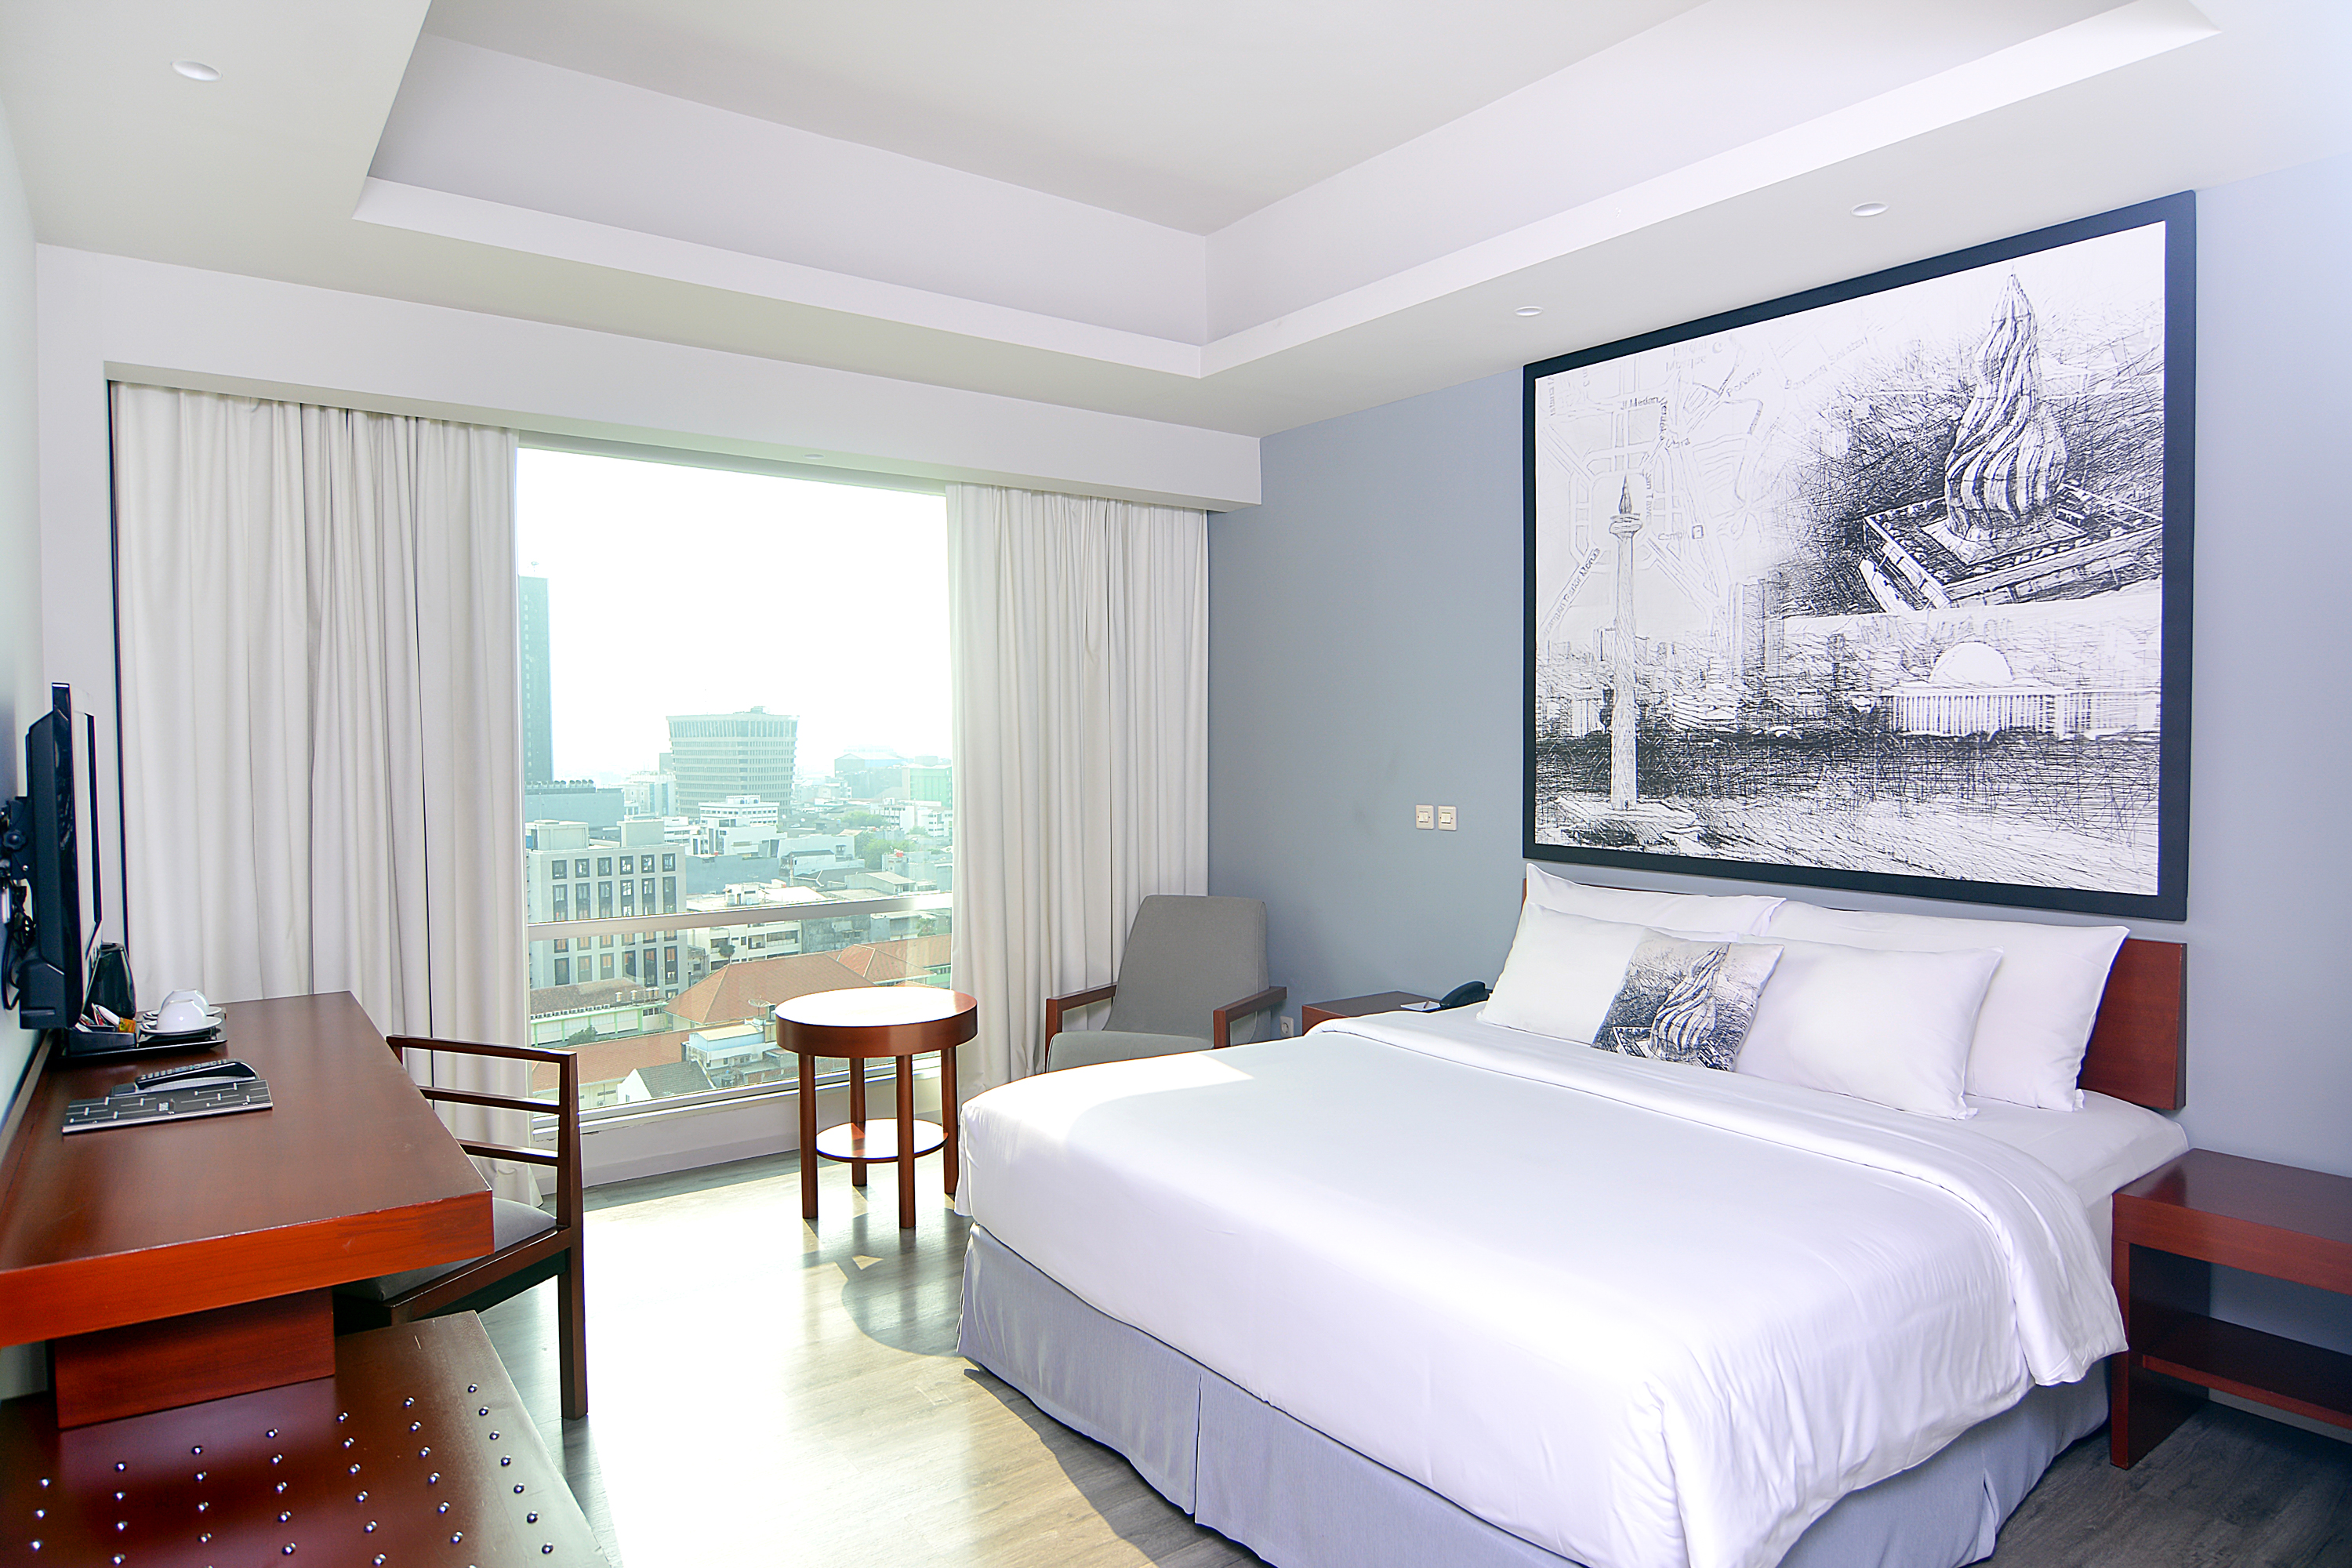 Executive Room Sparks Luxe